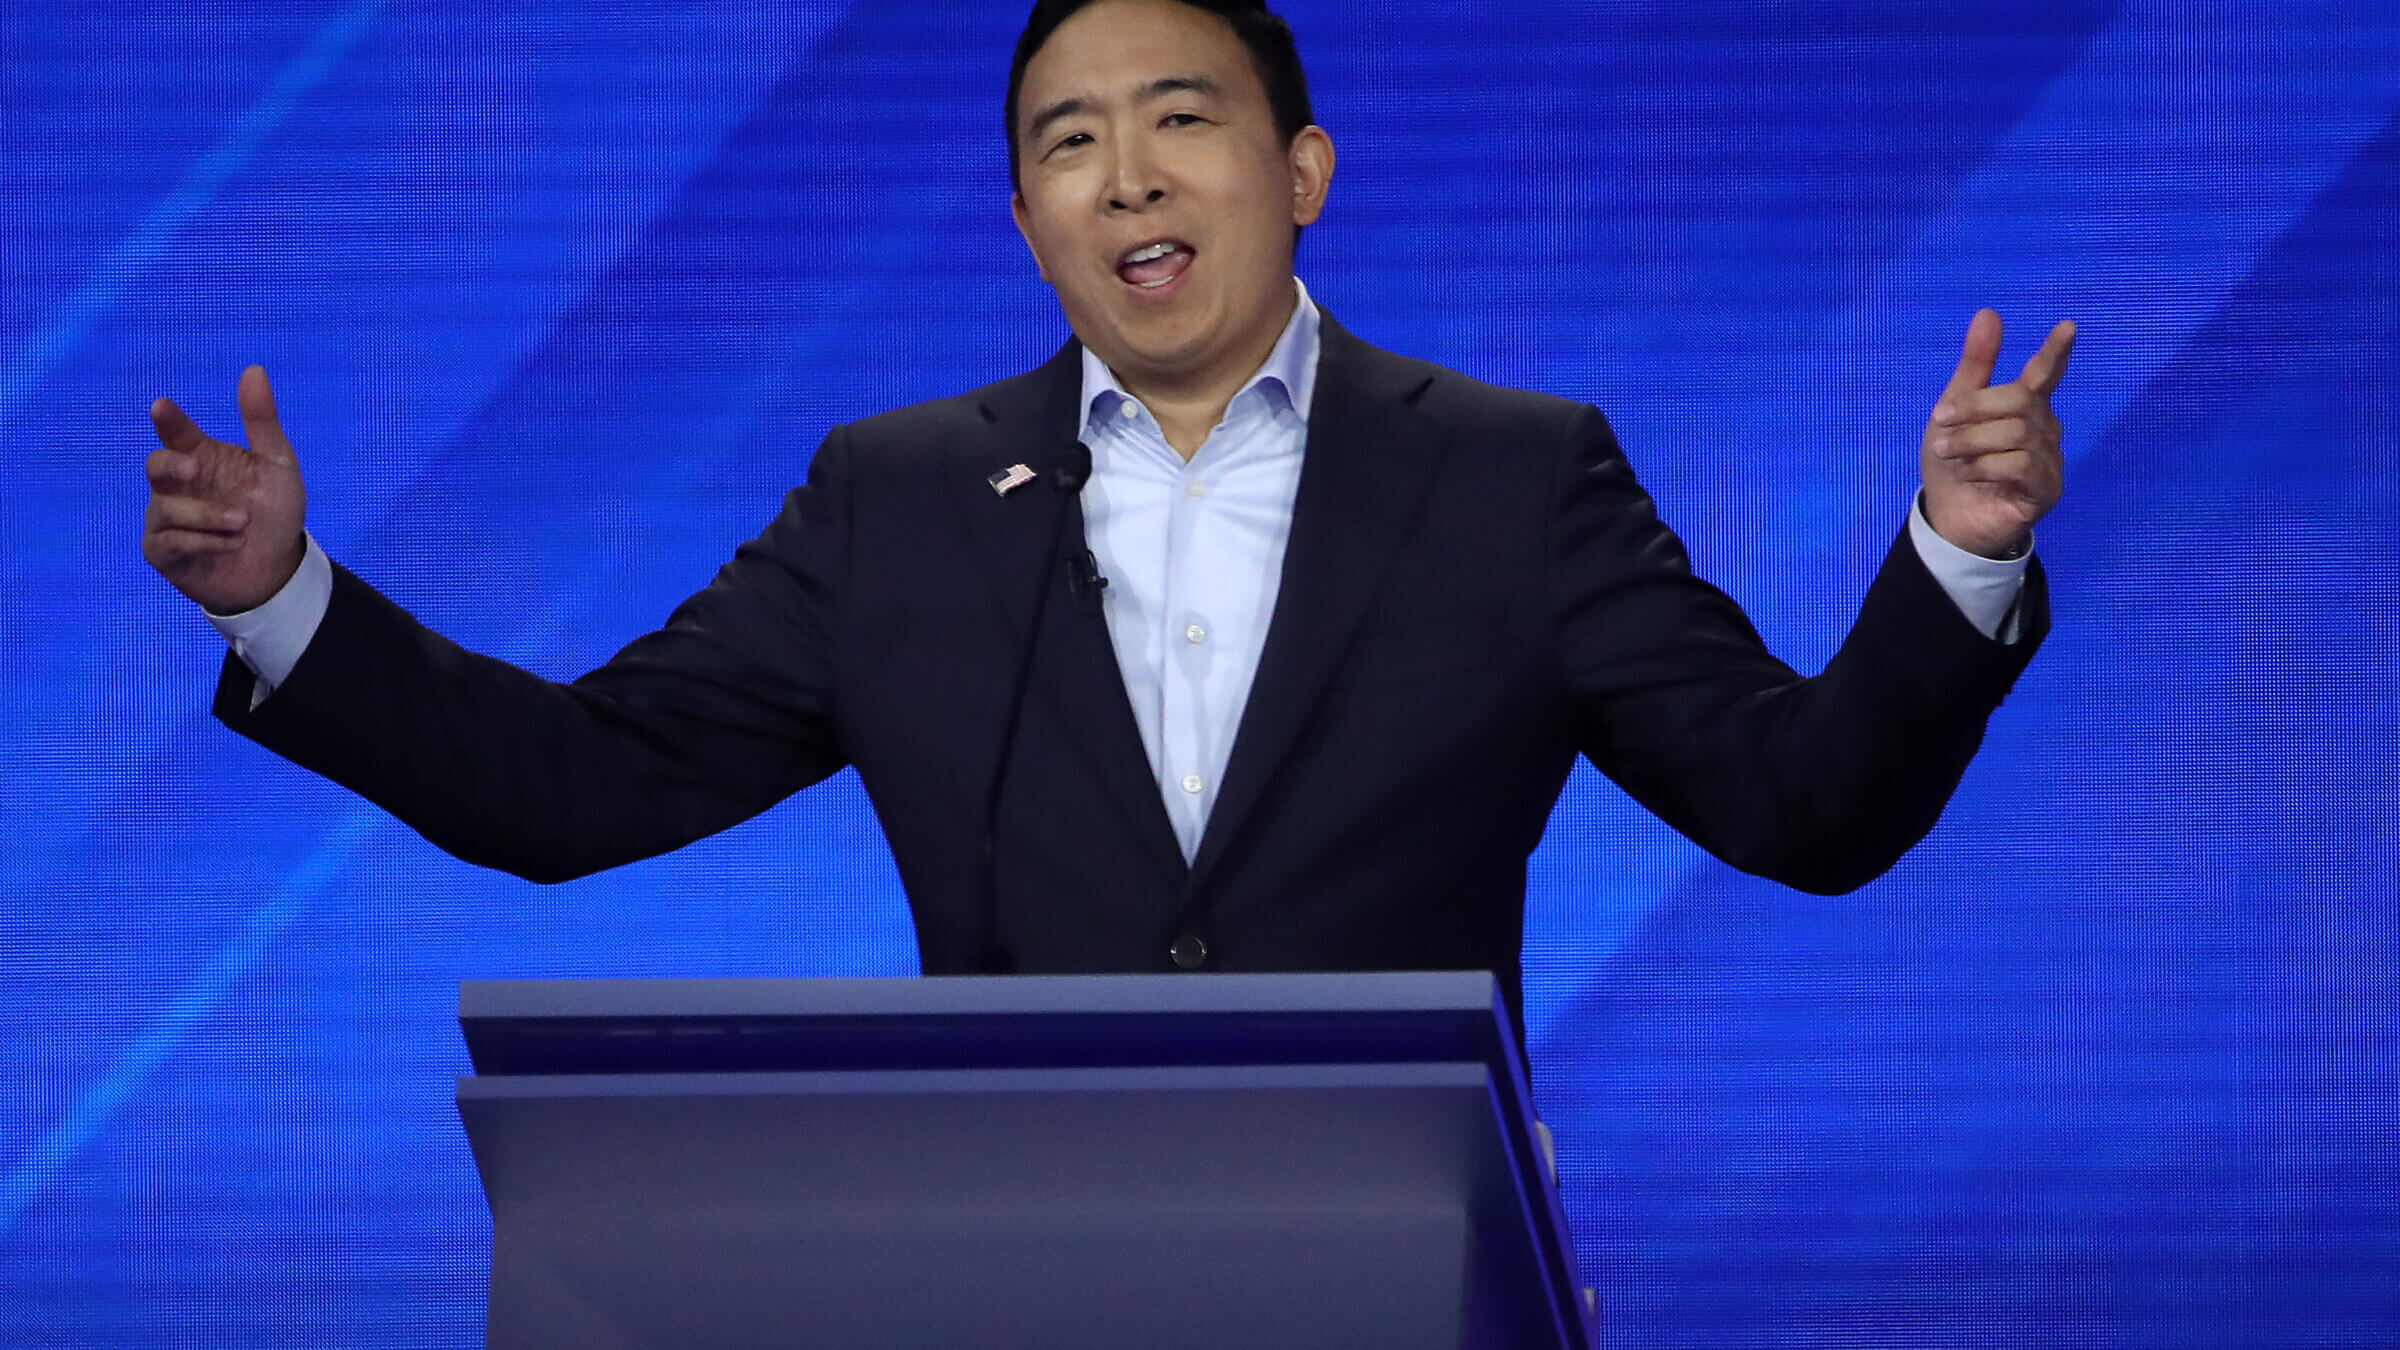 Andrew Yang in 2019. He is seeking to form a new political party called "Forward."